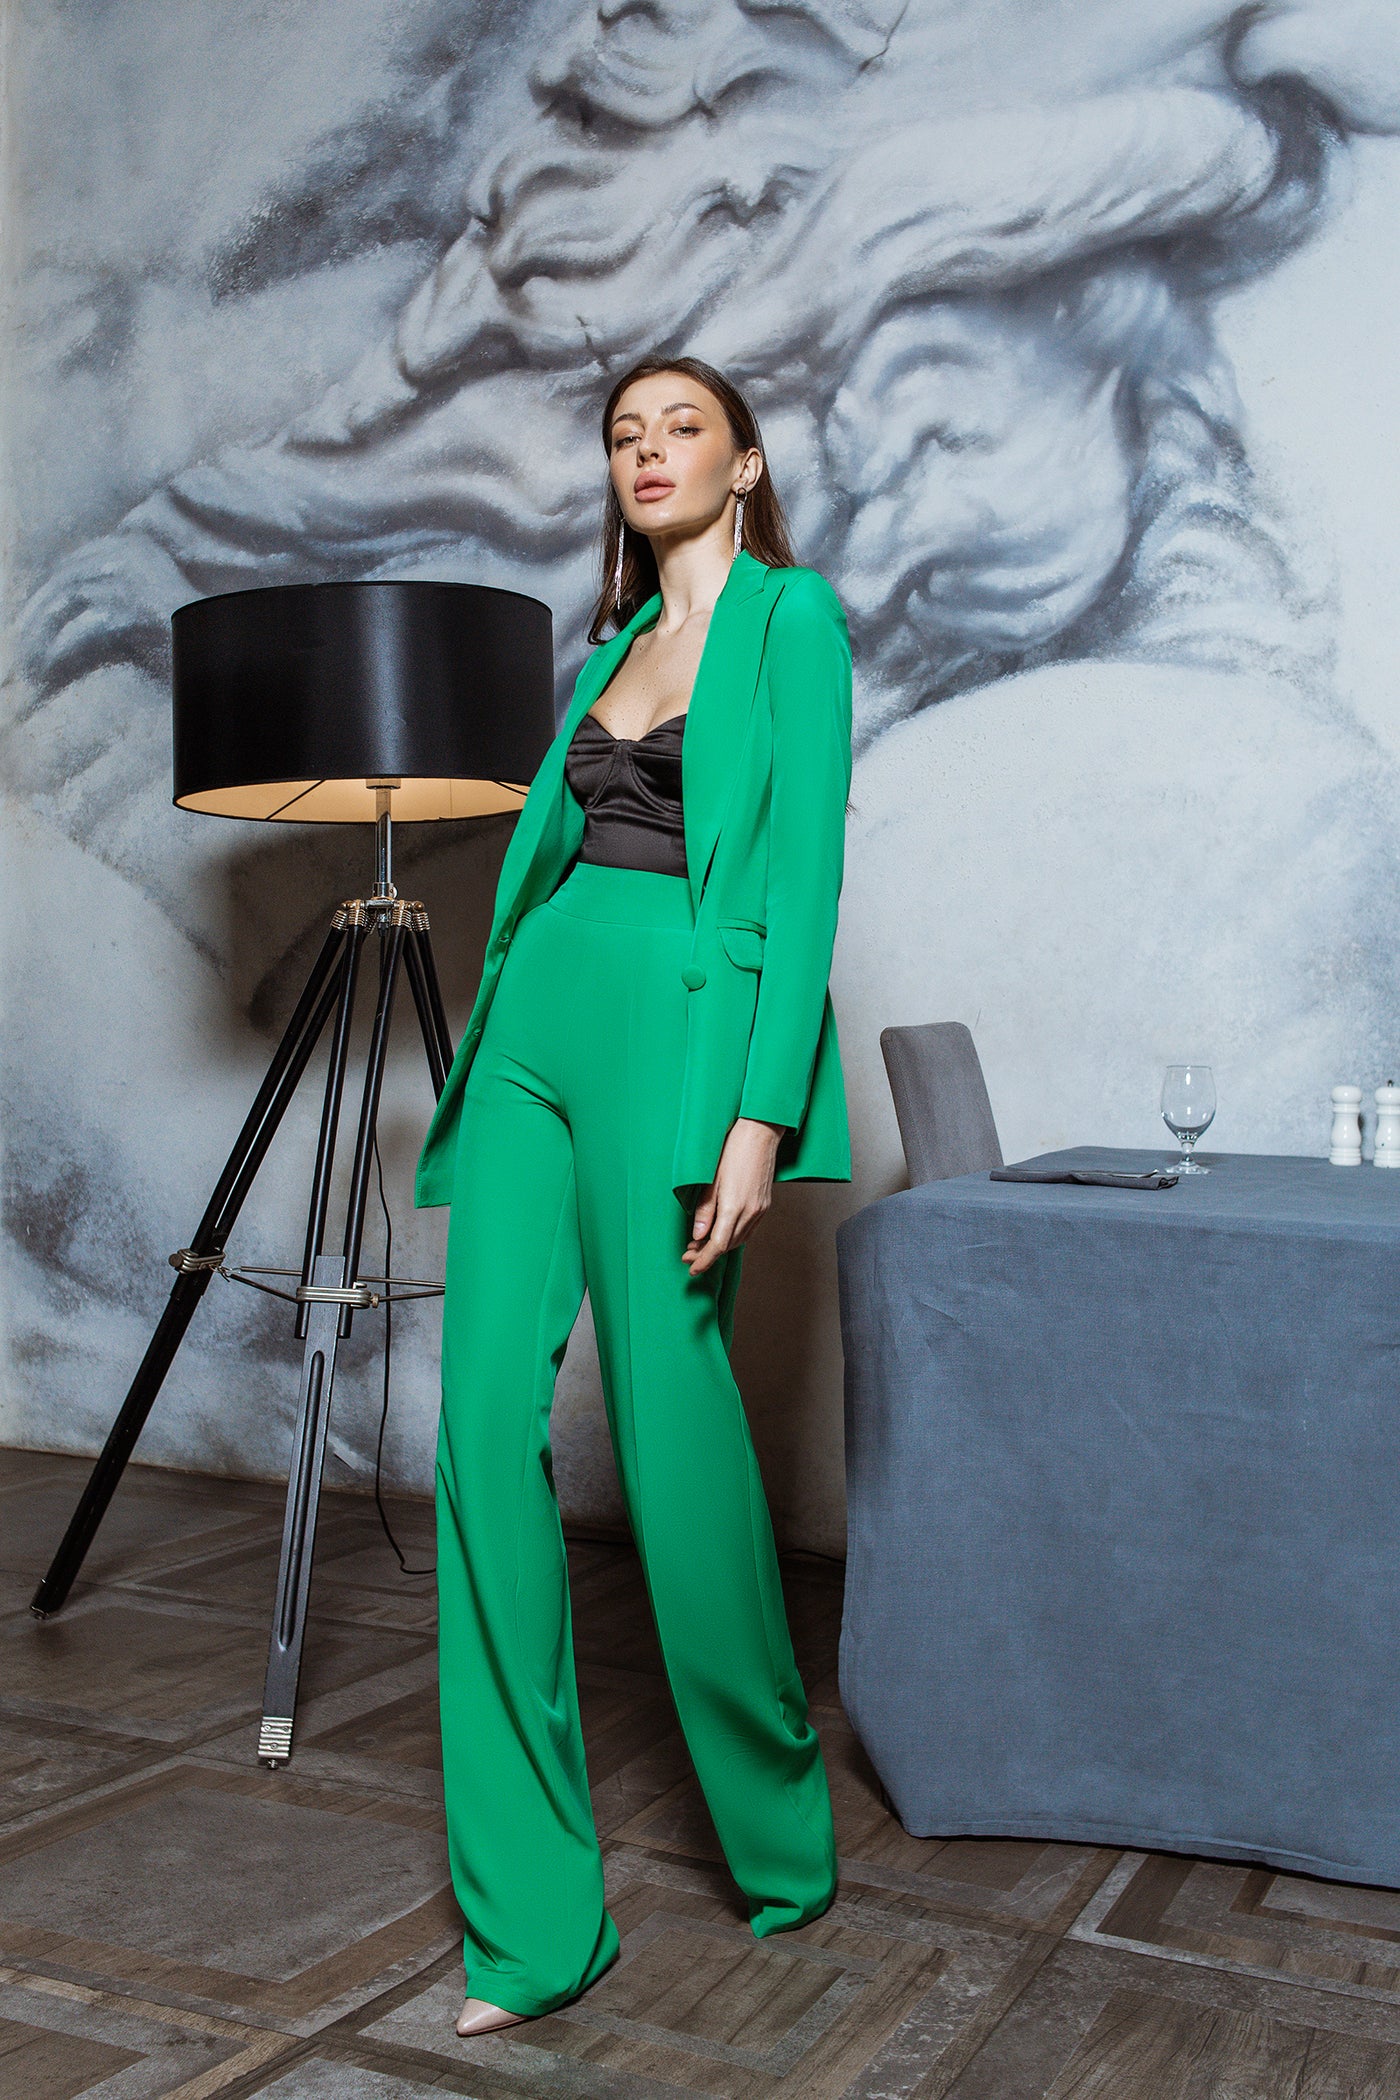 Green Belted Double Breasted Suit 2-Piece (article C273)